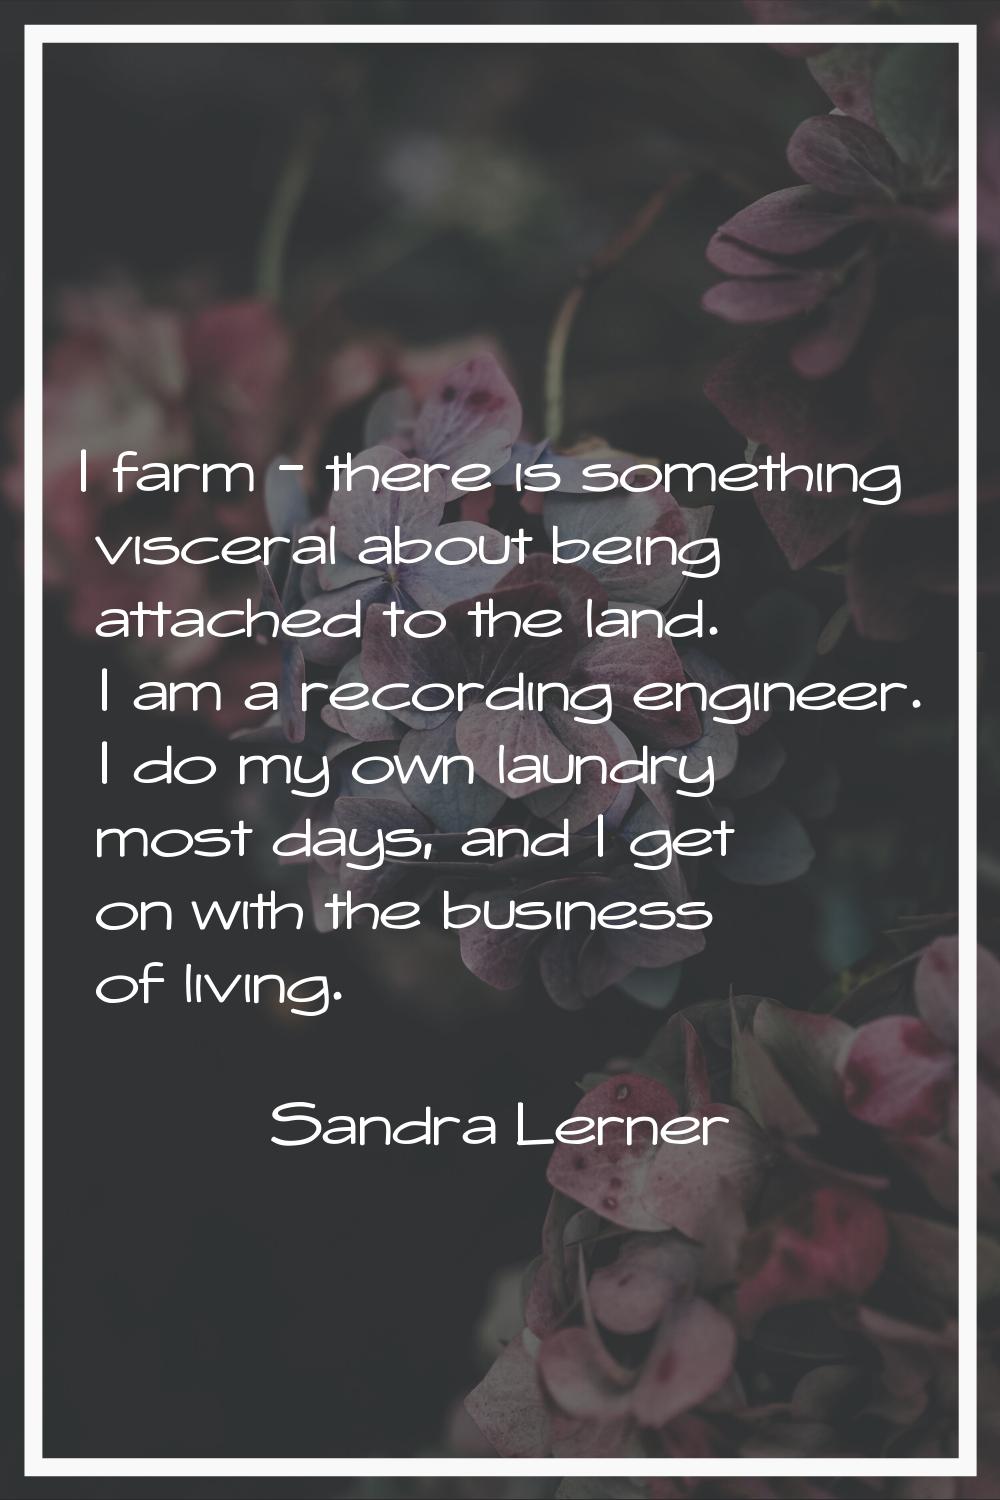 I farm - there is something visceral about being attached to the land. I am a recording engineer. I